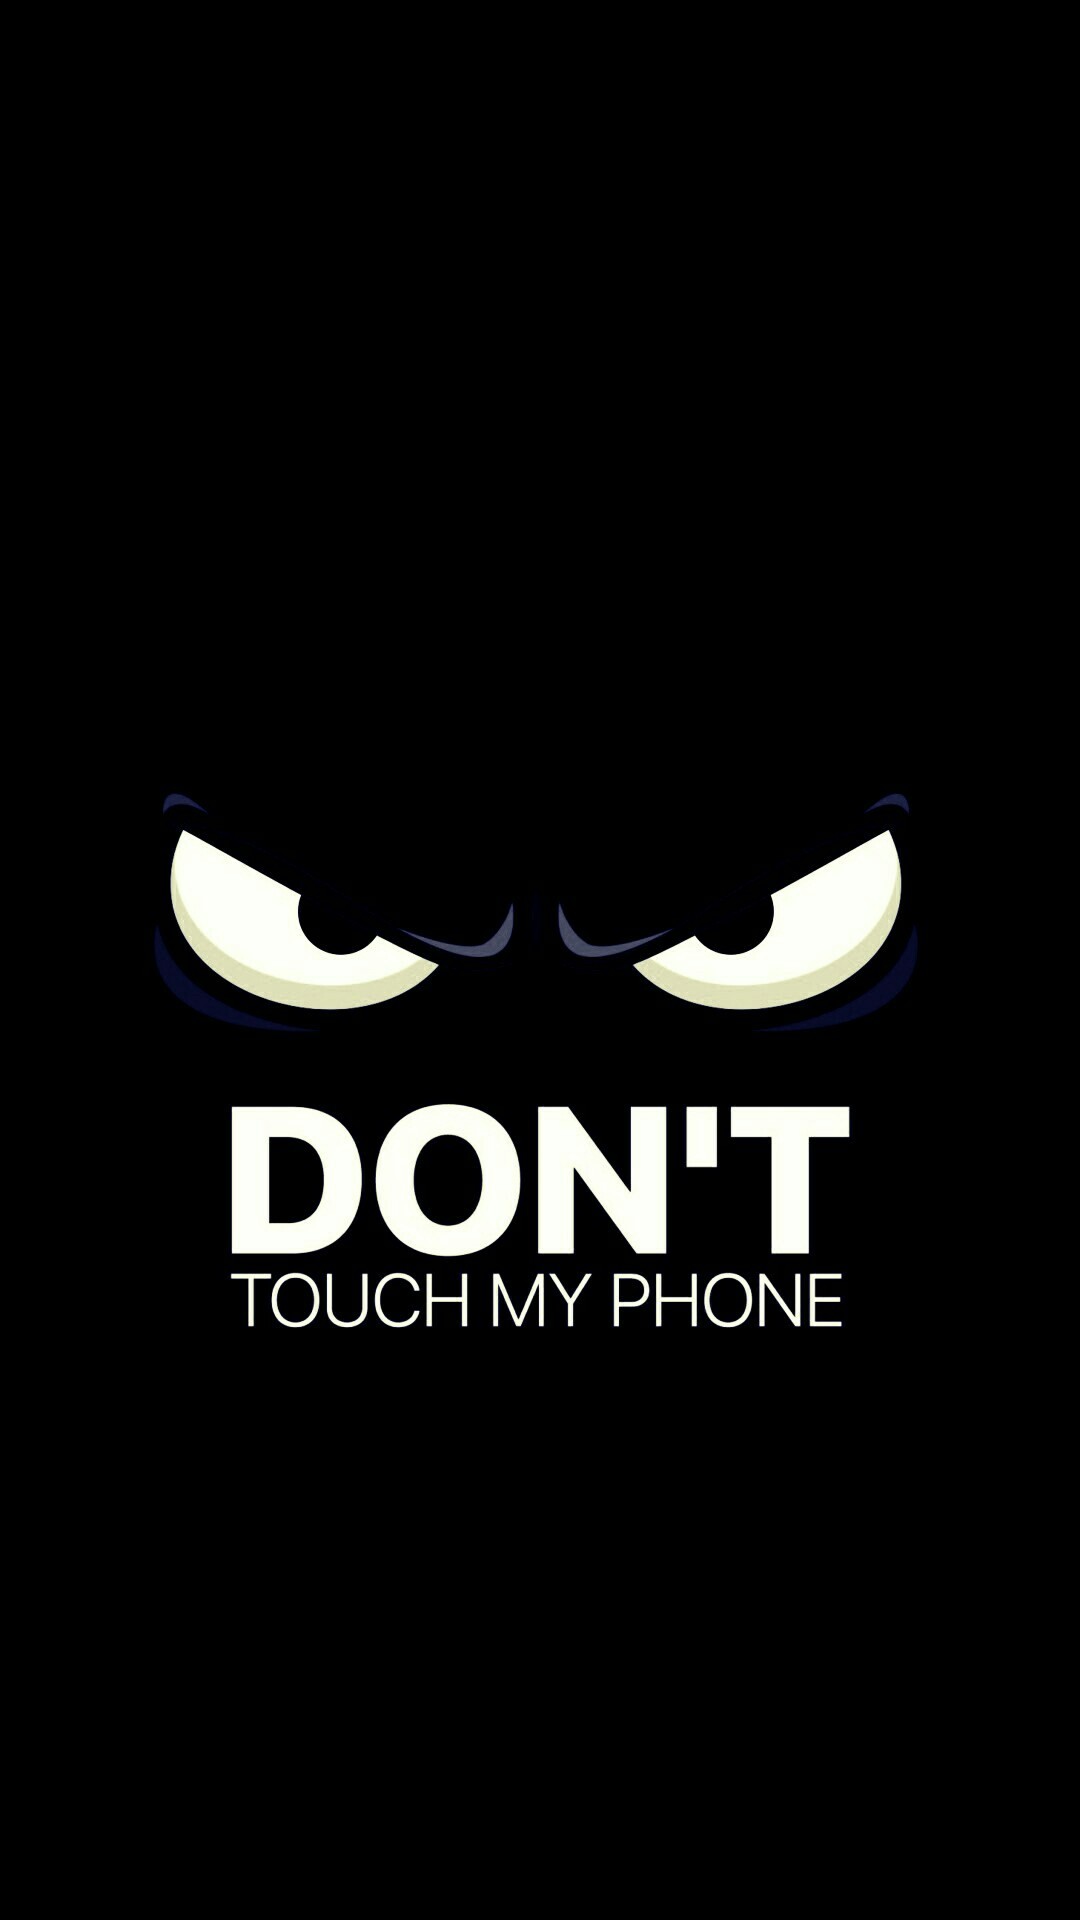 1080x1920 The person with this phone wallpaper doesn't like their phone touched. The  "don't" is emphasized.